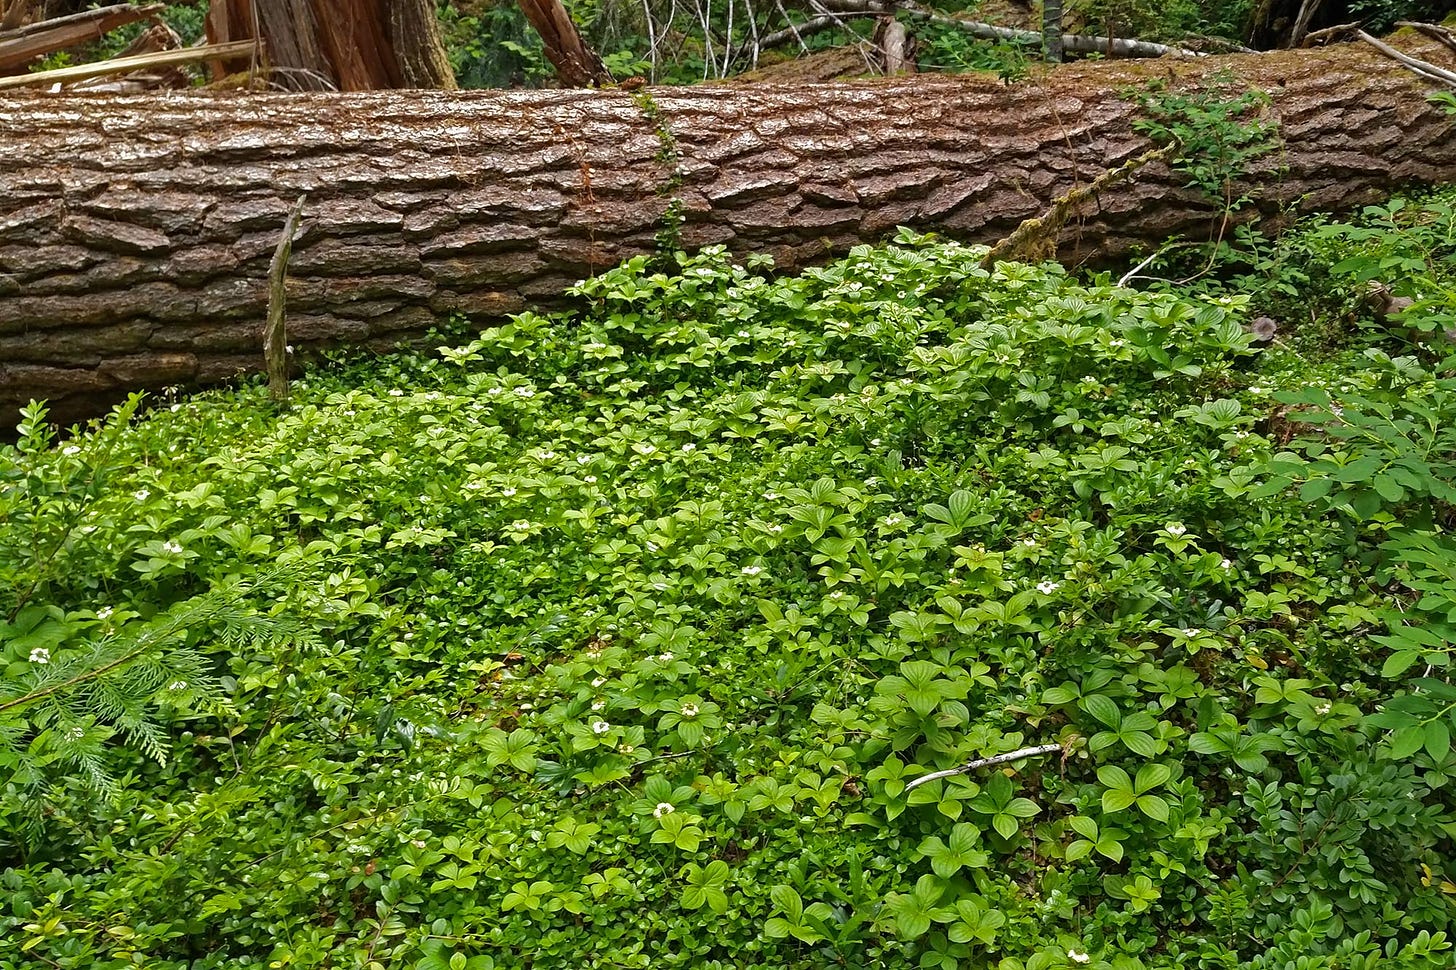 a sea of bright green twinflower vines and bunchberry dogwood, dotted with white floral bracts, carpeting the forest floor beside a fallen log from a conifer